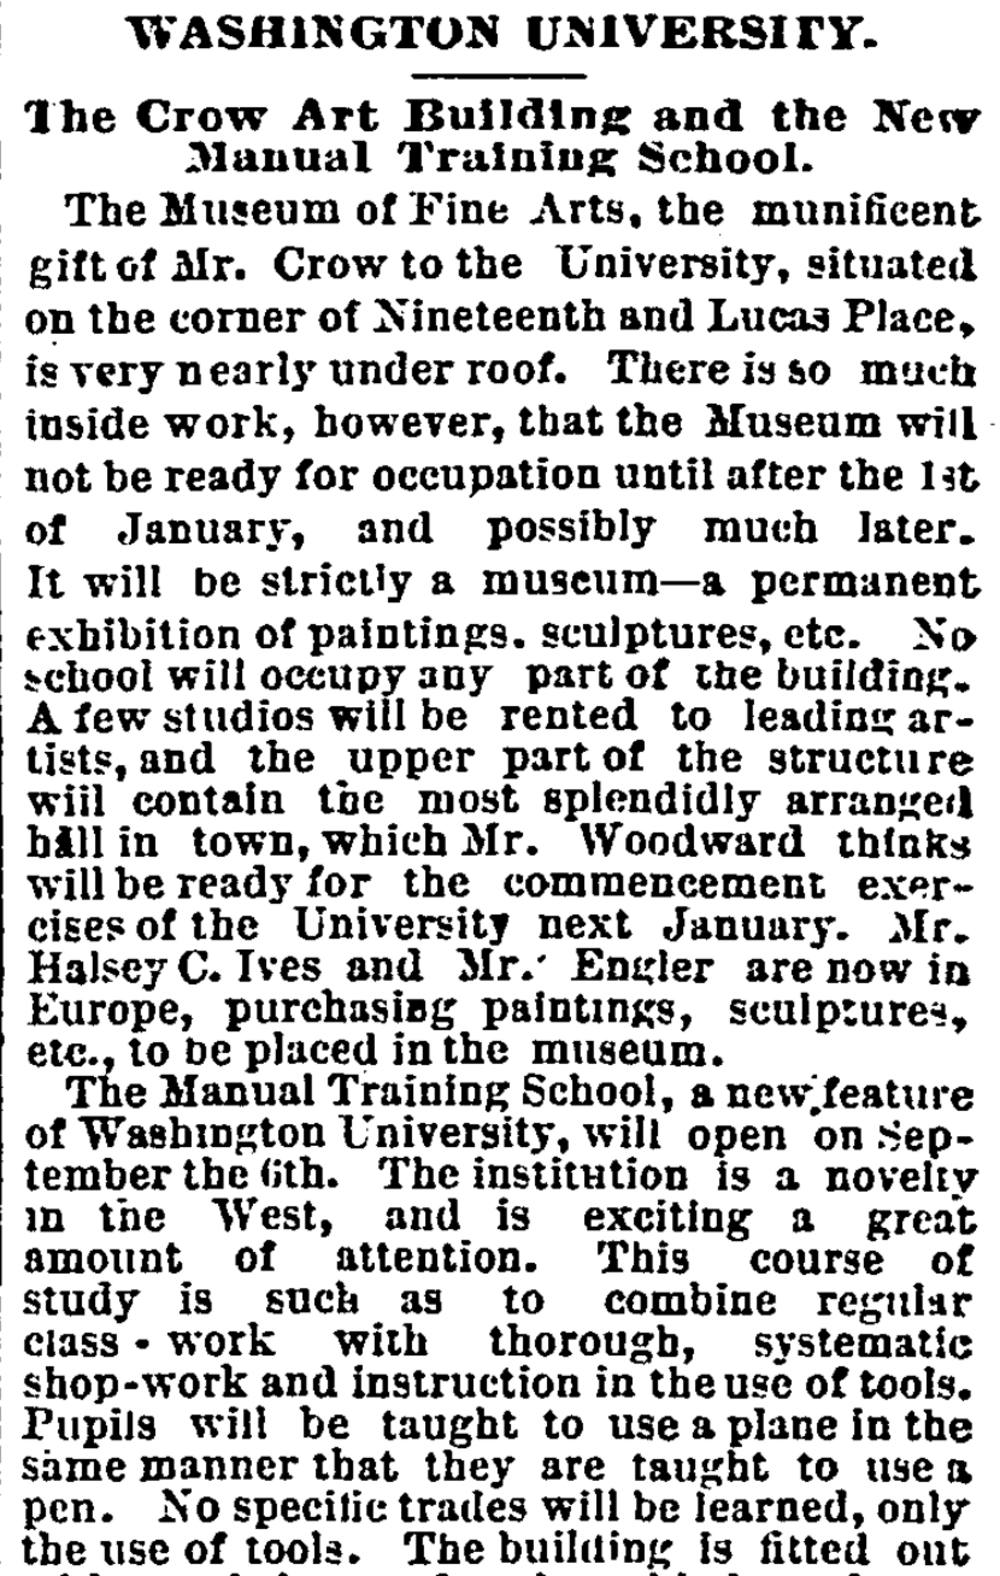 The beginning of the article "Washington University: The Crow Art Building and the New Manual Training School" from the St. Louis Post-Dispatch